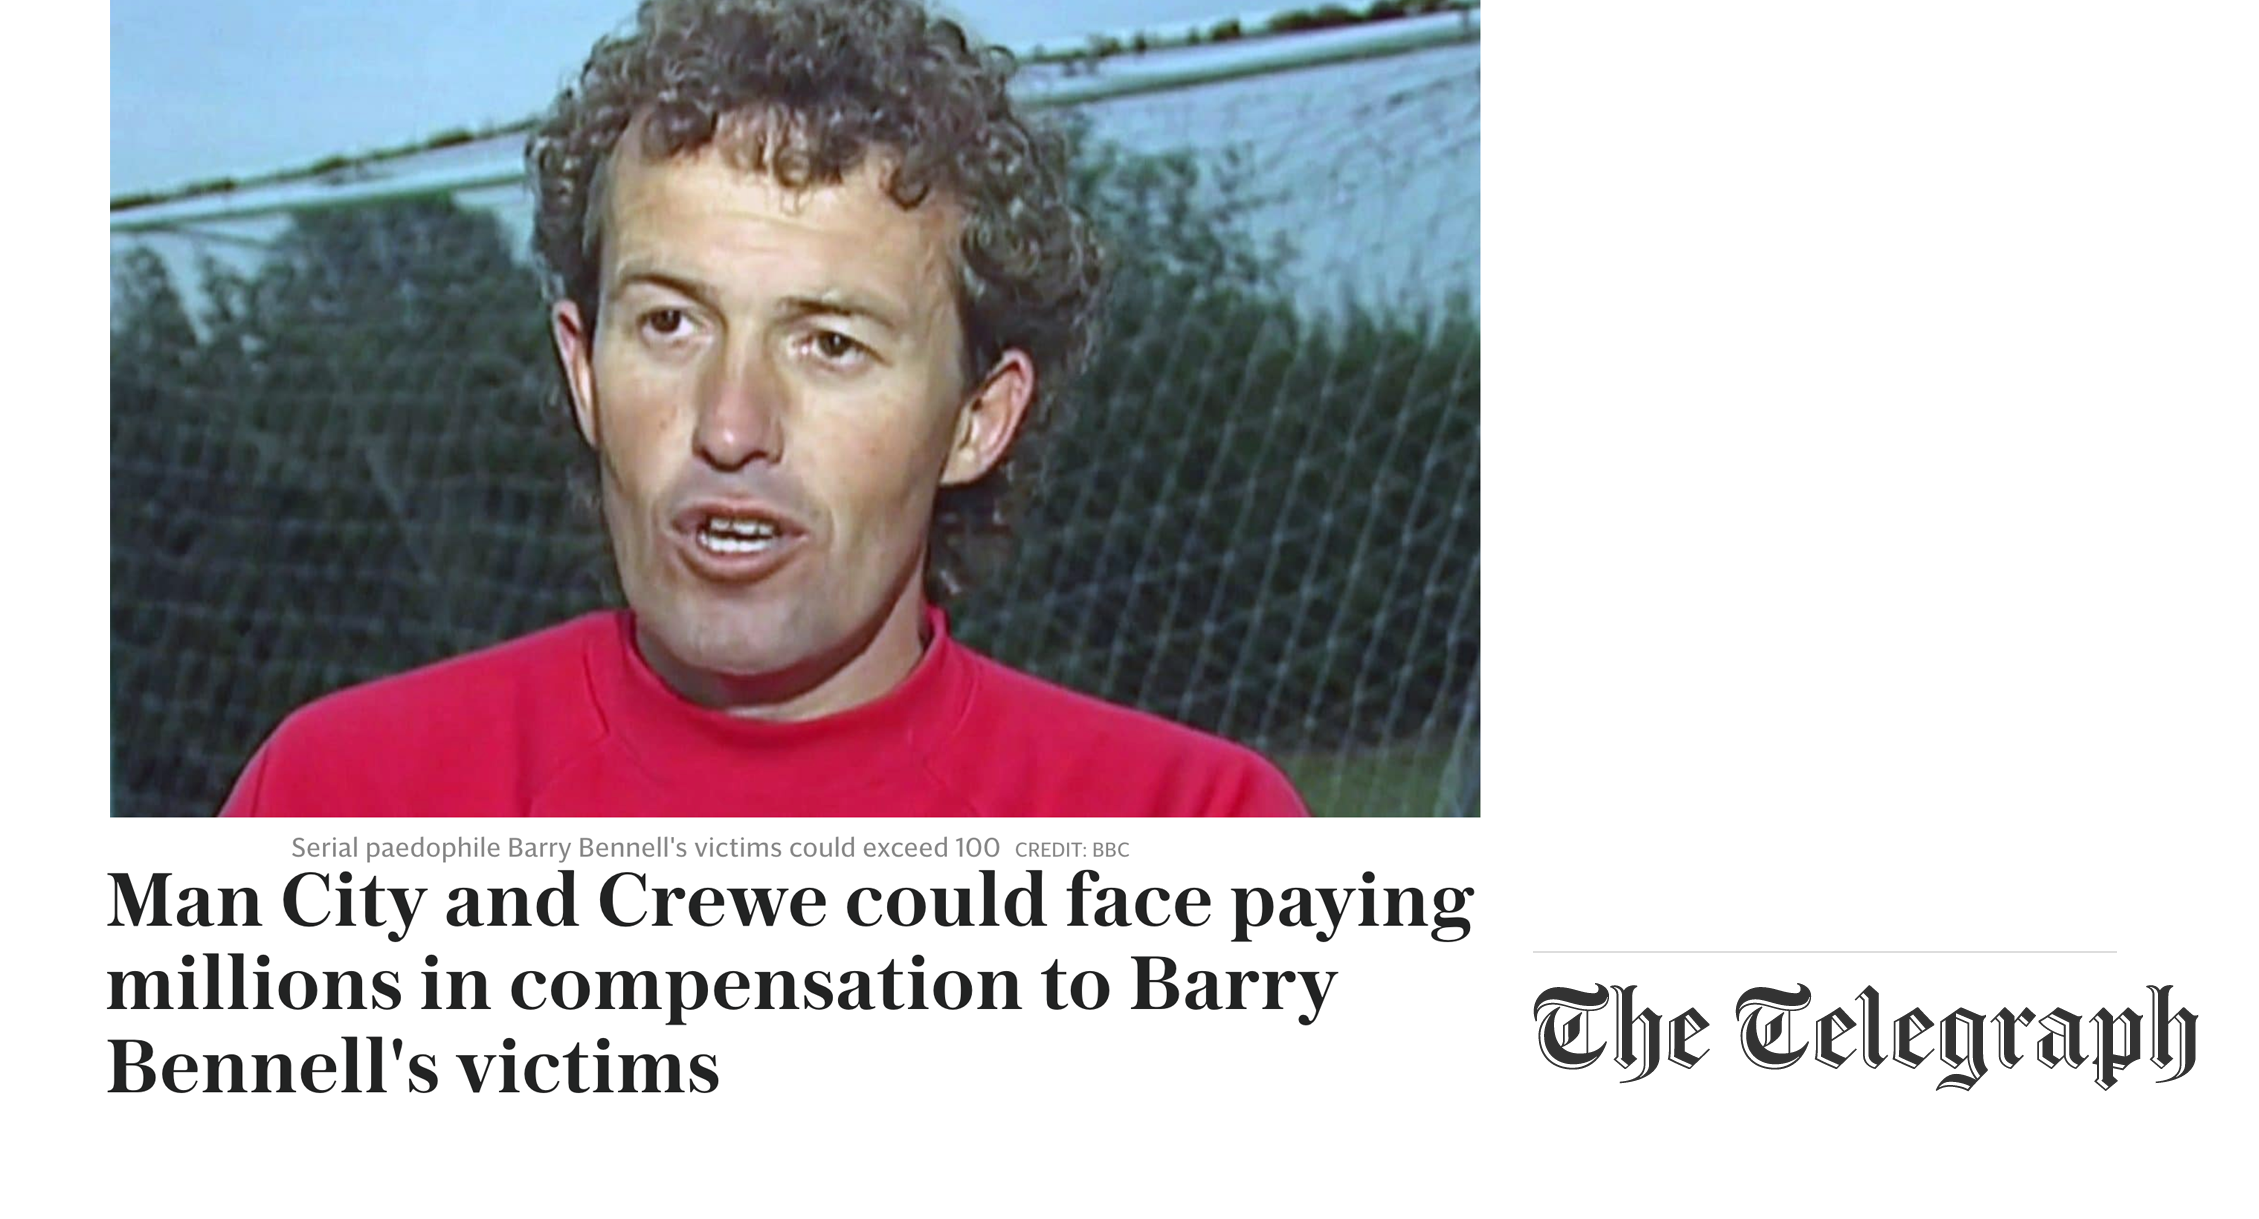 Man City and Crewe could face paying millions in compensation to Barry Bennell’s victims